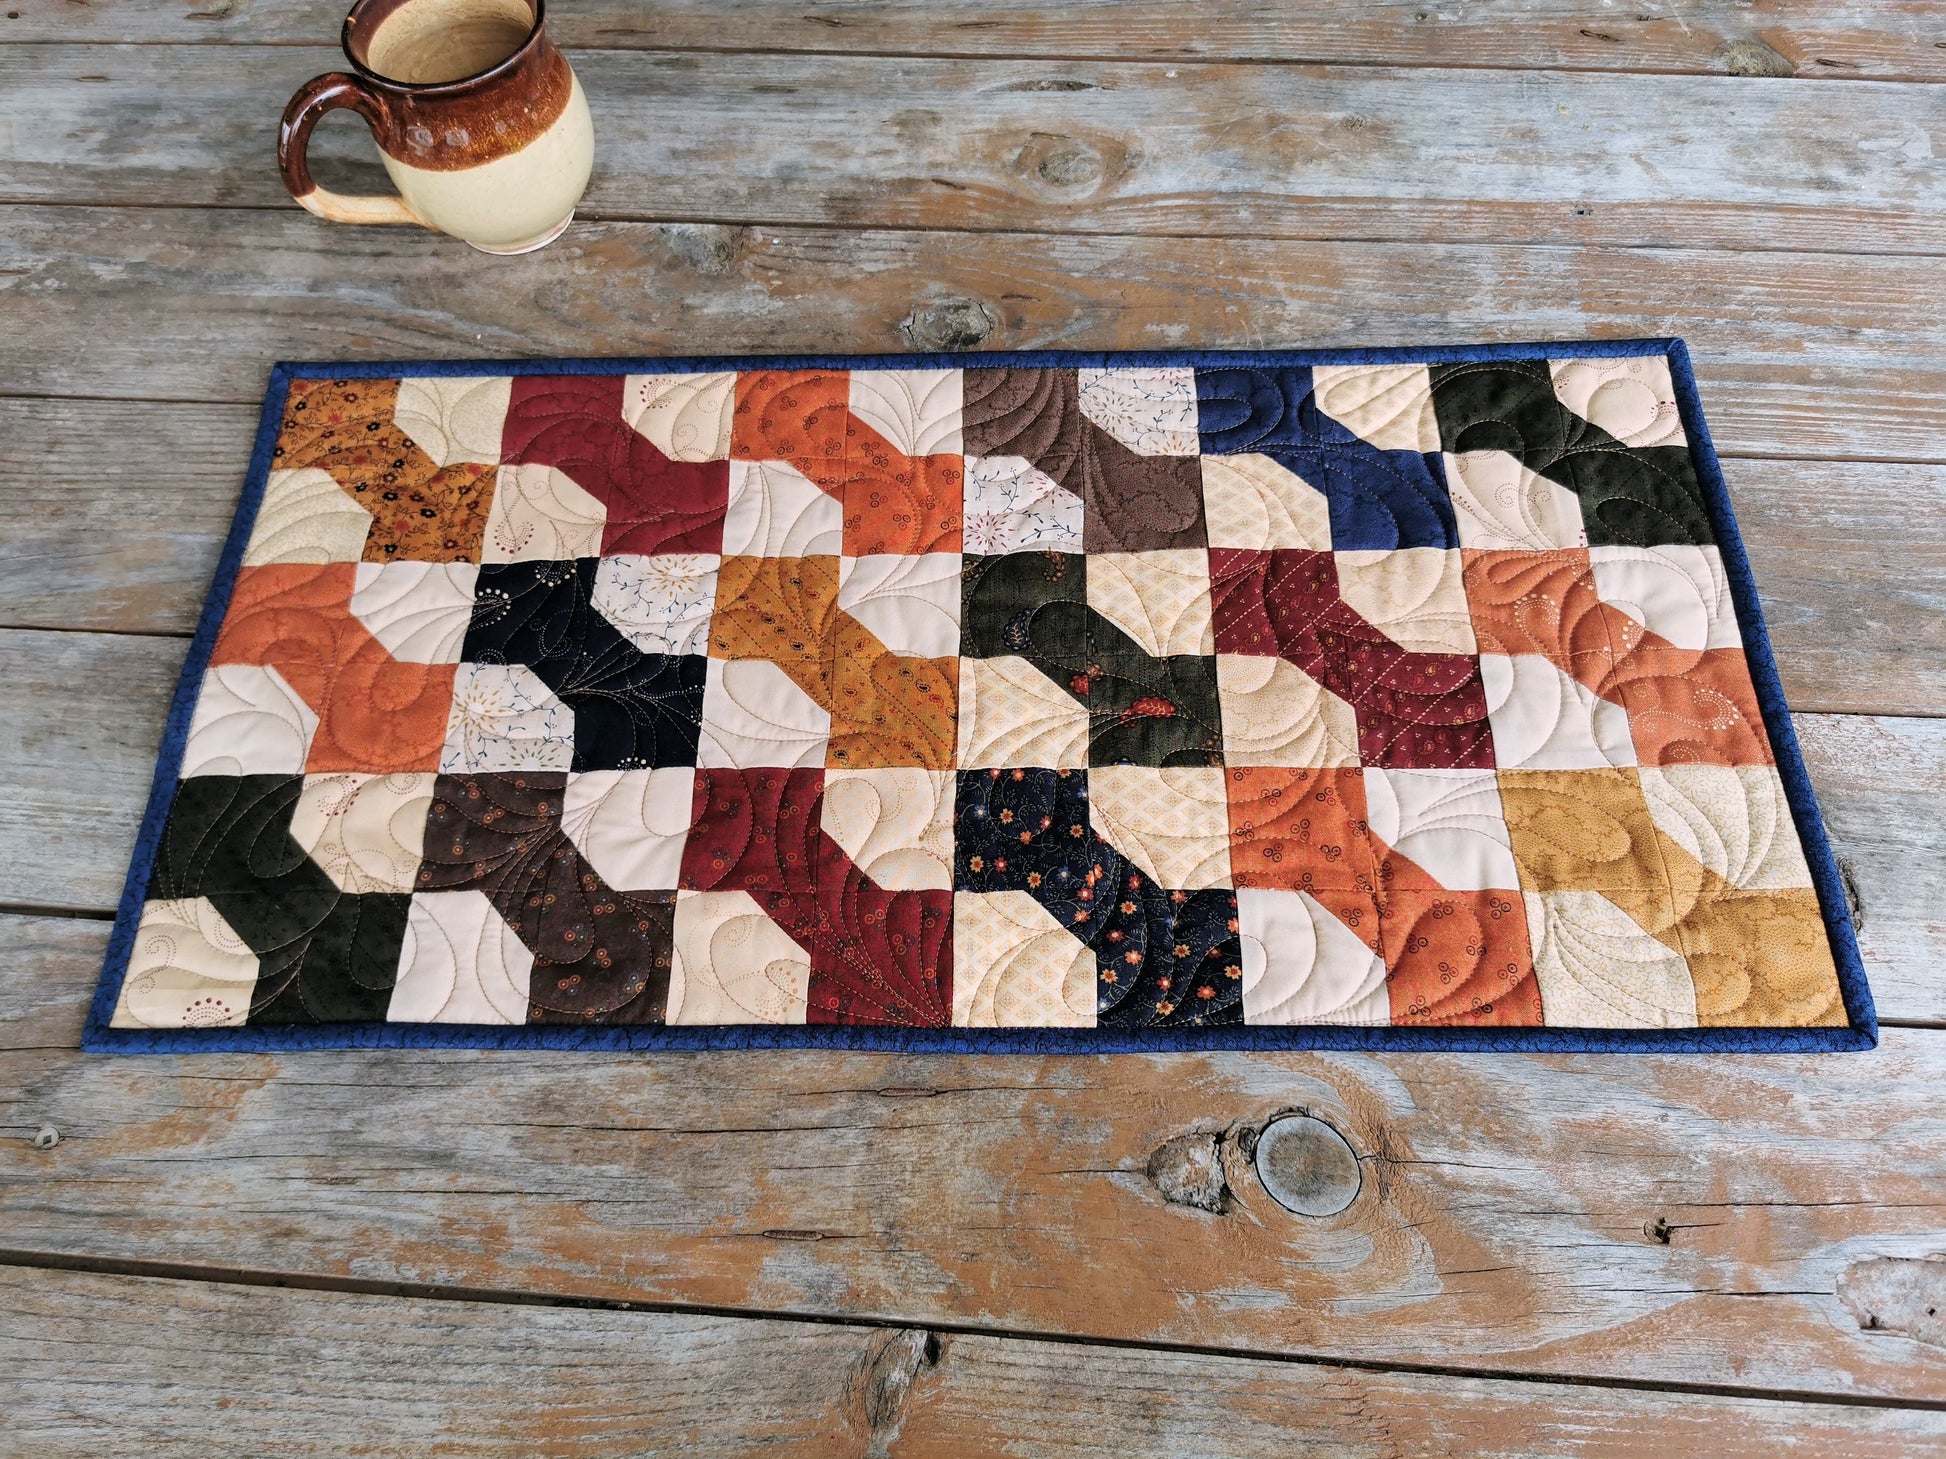 The quilted table runner is made of bowtie patchwork. Dark country florals are from collection called Paisley Park by Kansas Troubles. Bowties colours include country red, navy blue, brown, green, burnt orange, and antique gold. A scrappy beige background adds rustic charm. Dark blue binding is around the edge of the quilt.